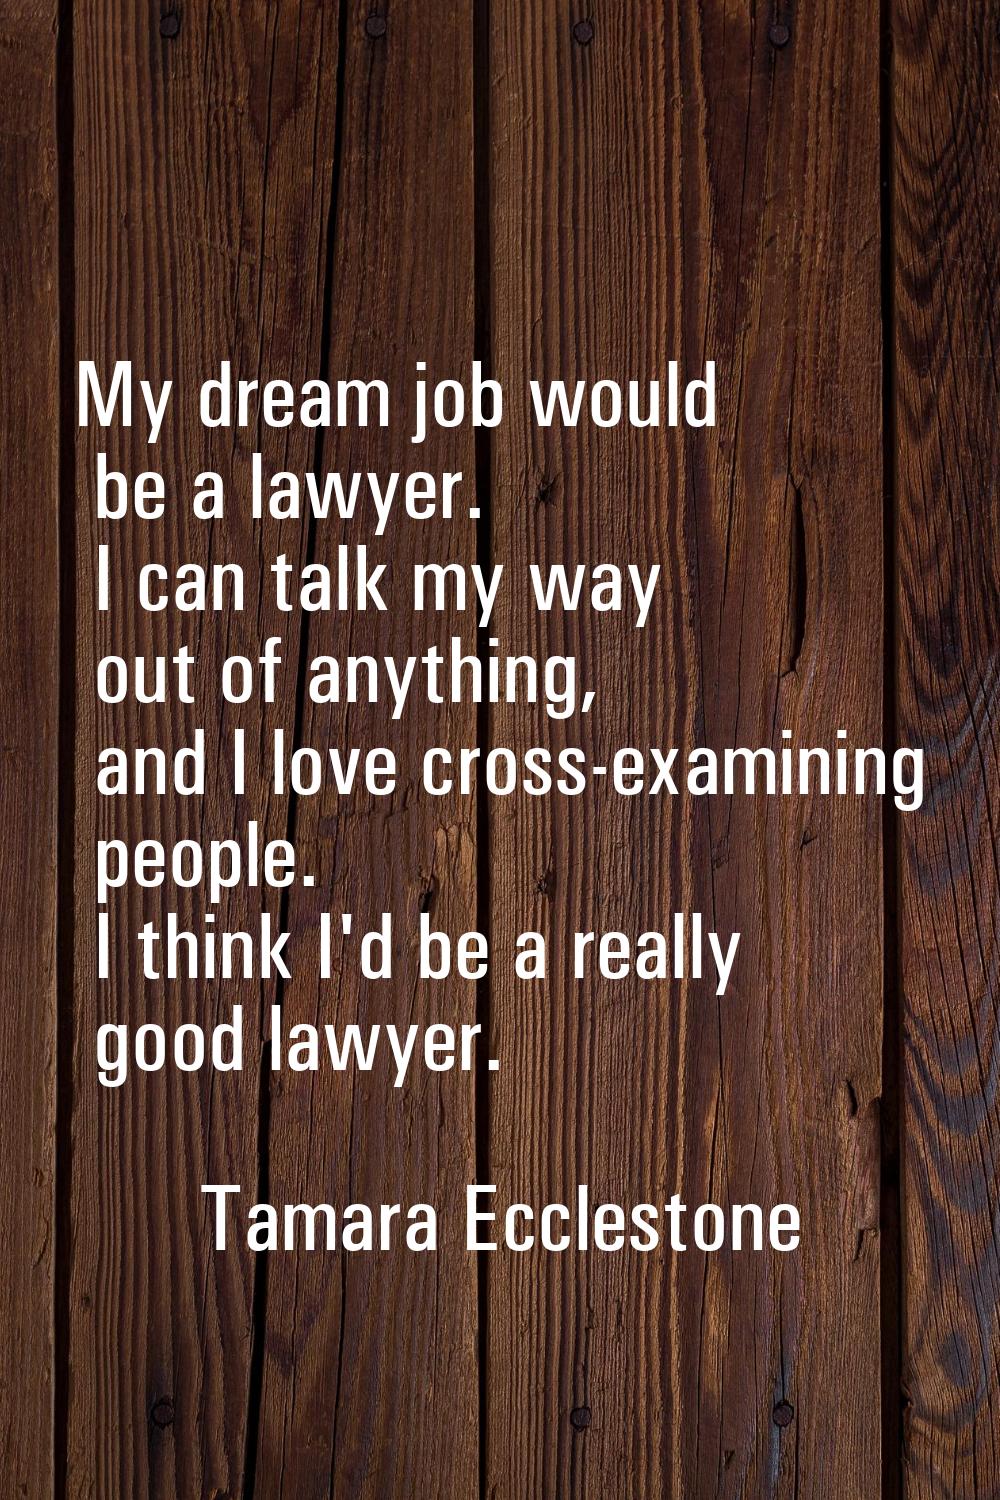 My dream job would be a lawyer. I can talk my way out of anything, and I love cross-examining peopl